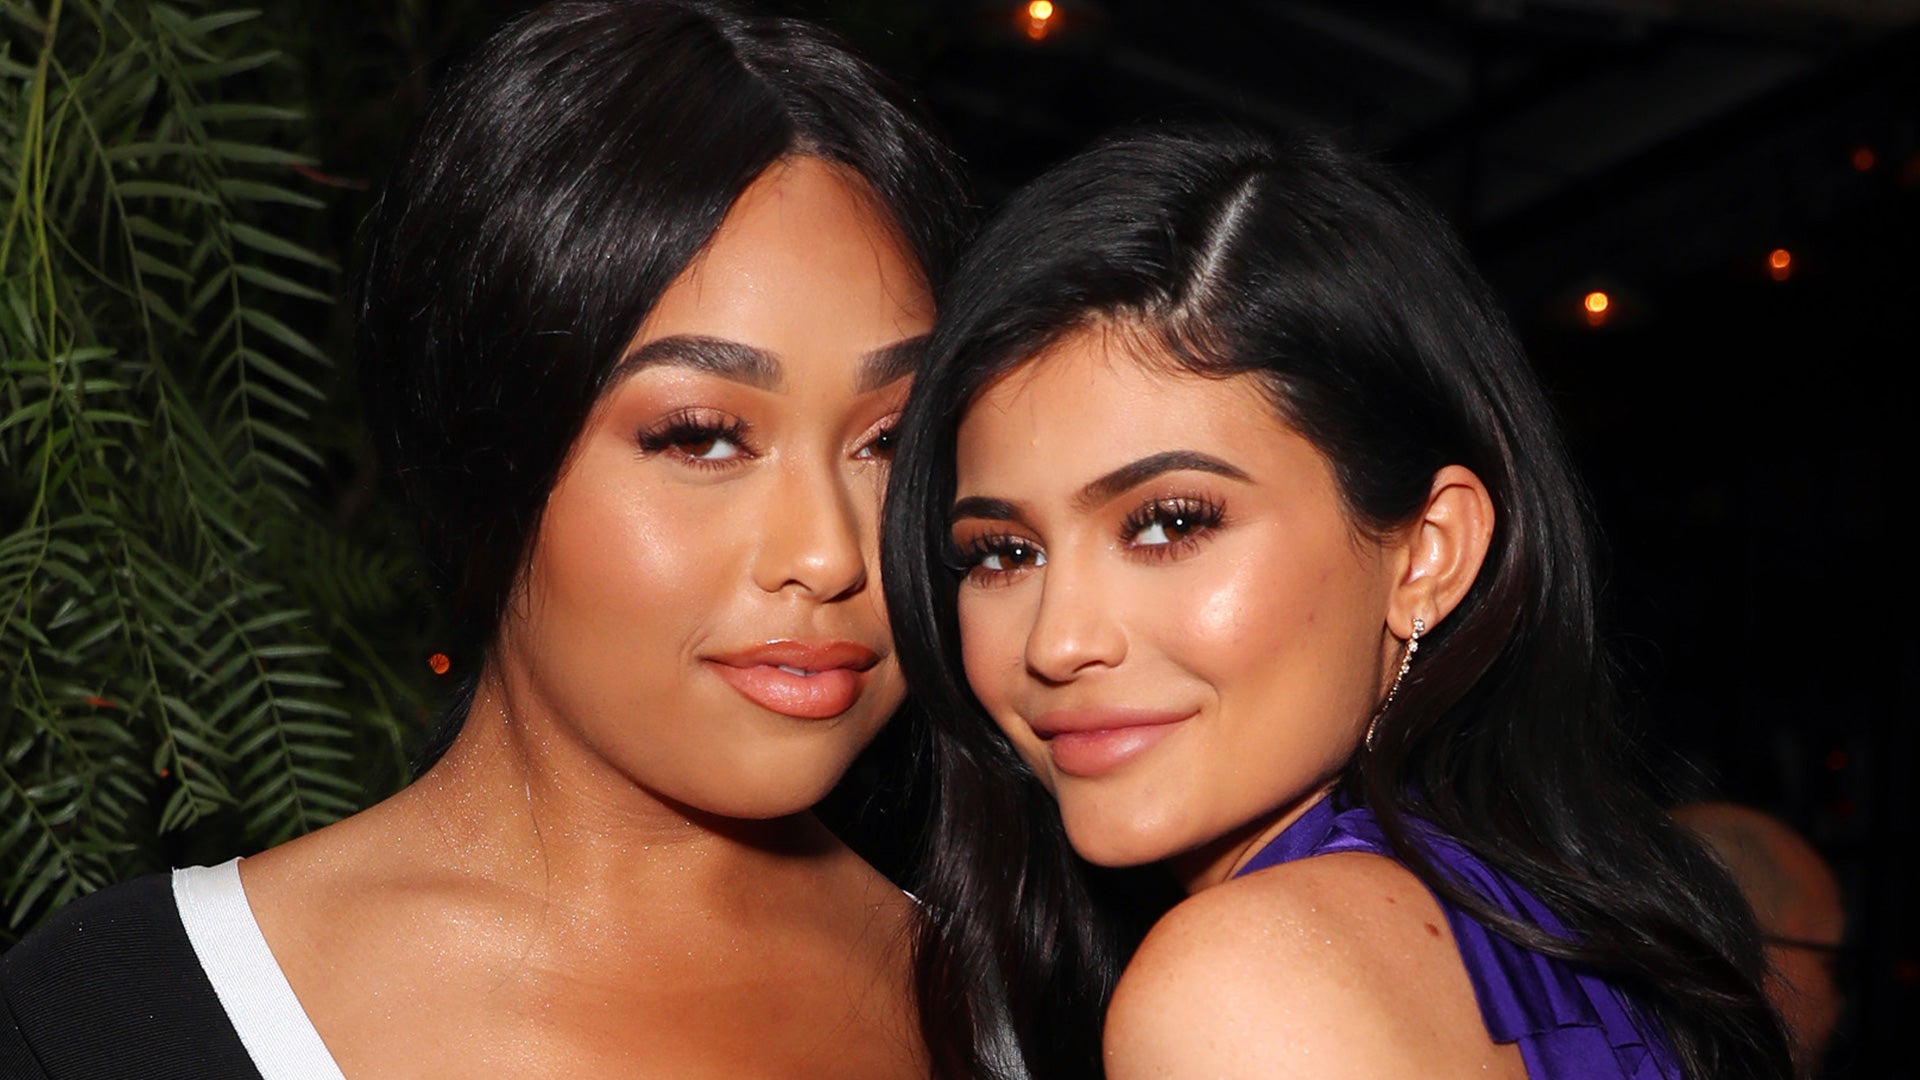 Jordyn Woods' Weight Loss Has Social Media Speculating She Used